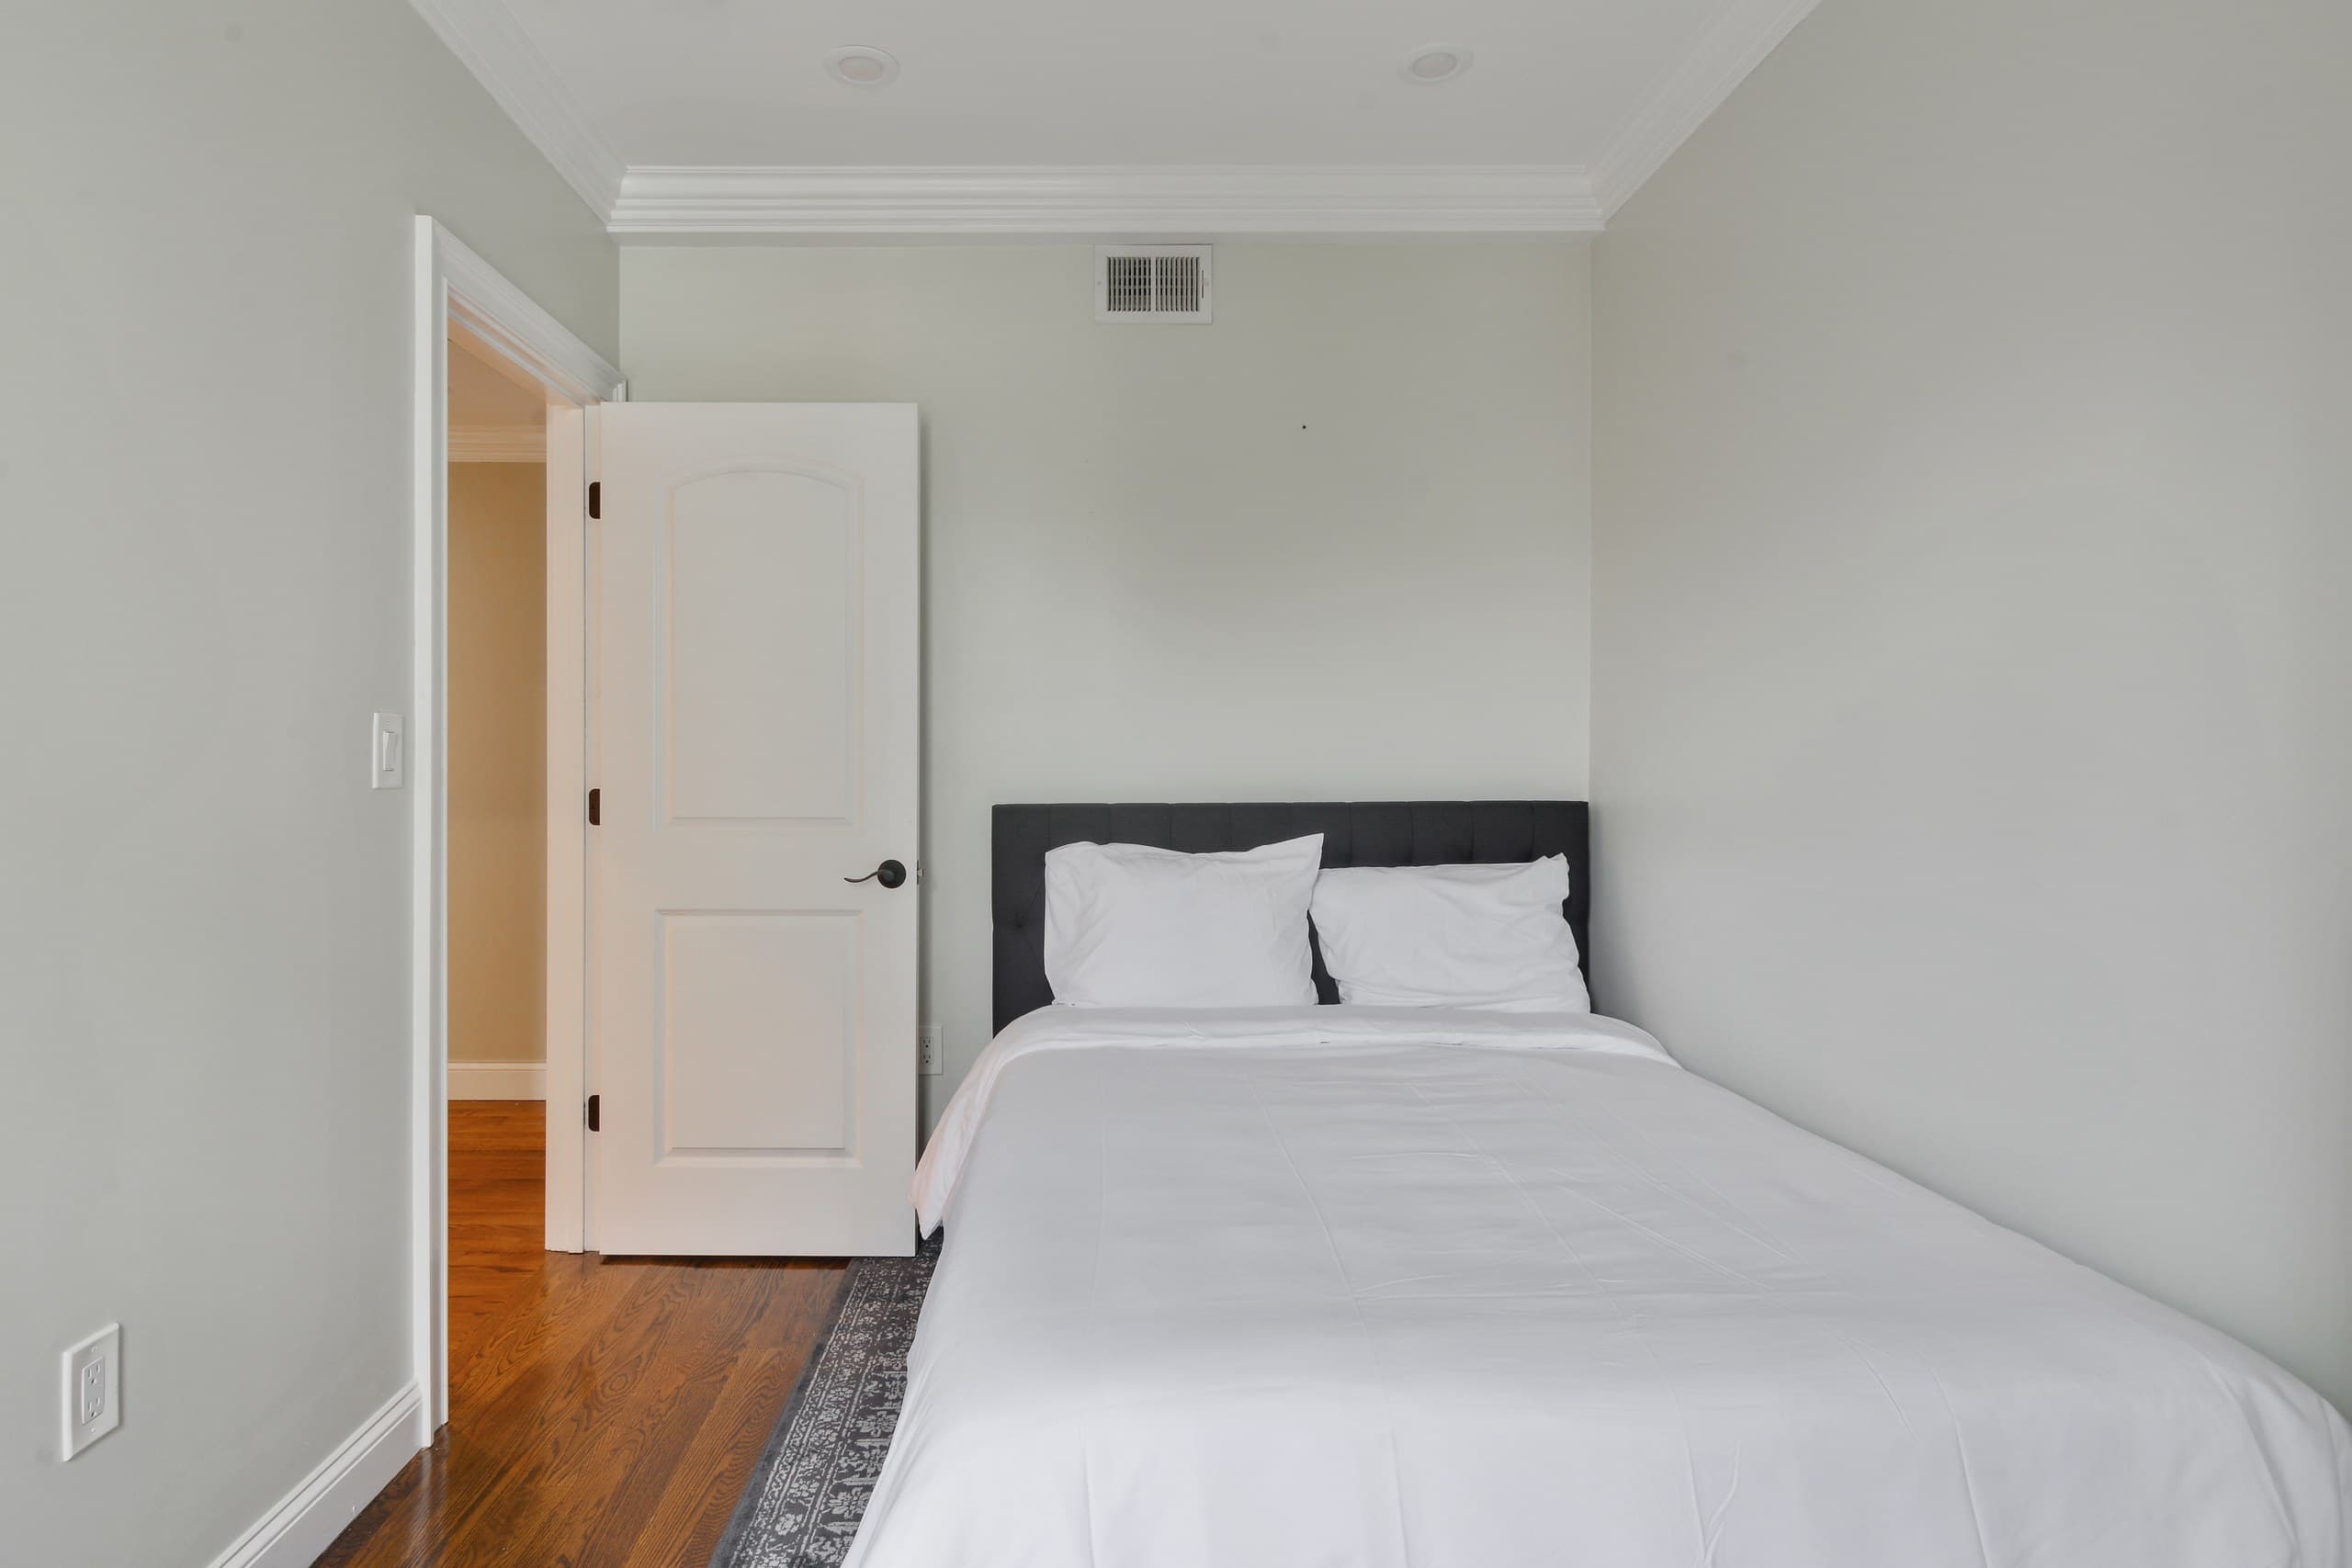 Photo 16 of #1557: Queen Bedroom A at June Homes